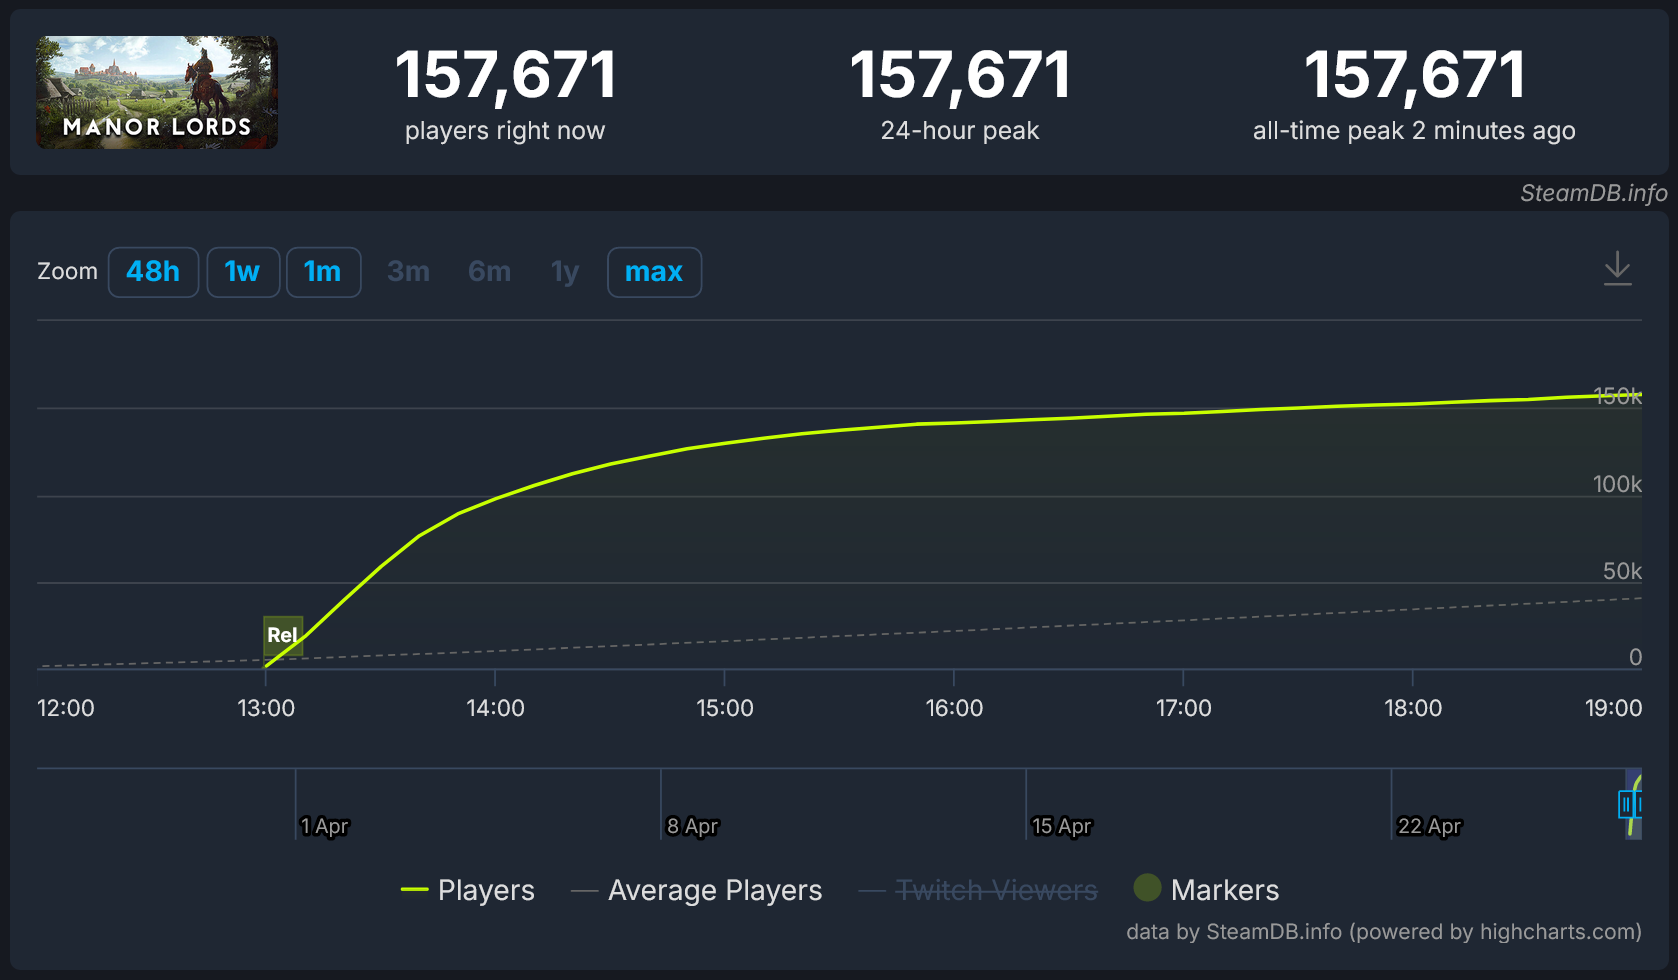 Graph showing Manor Lords concurrent player count surpassing 150,000